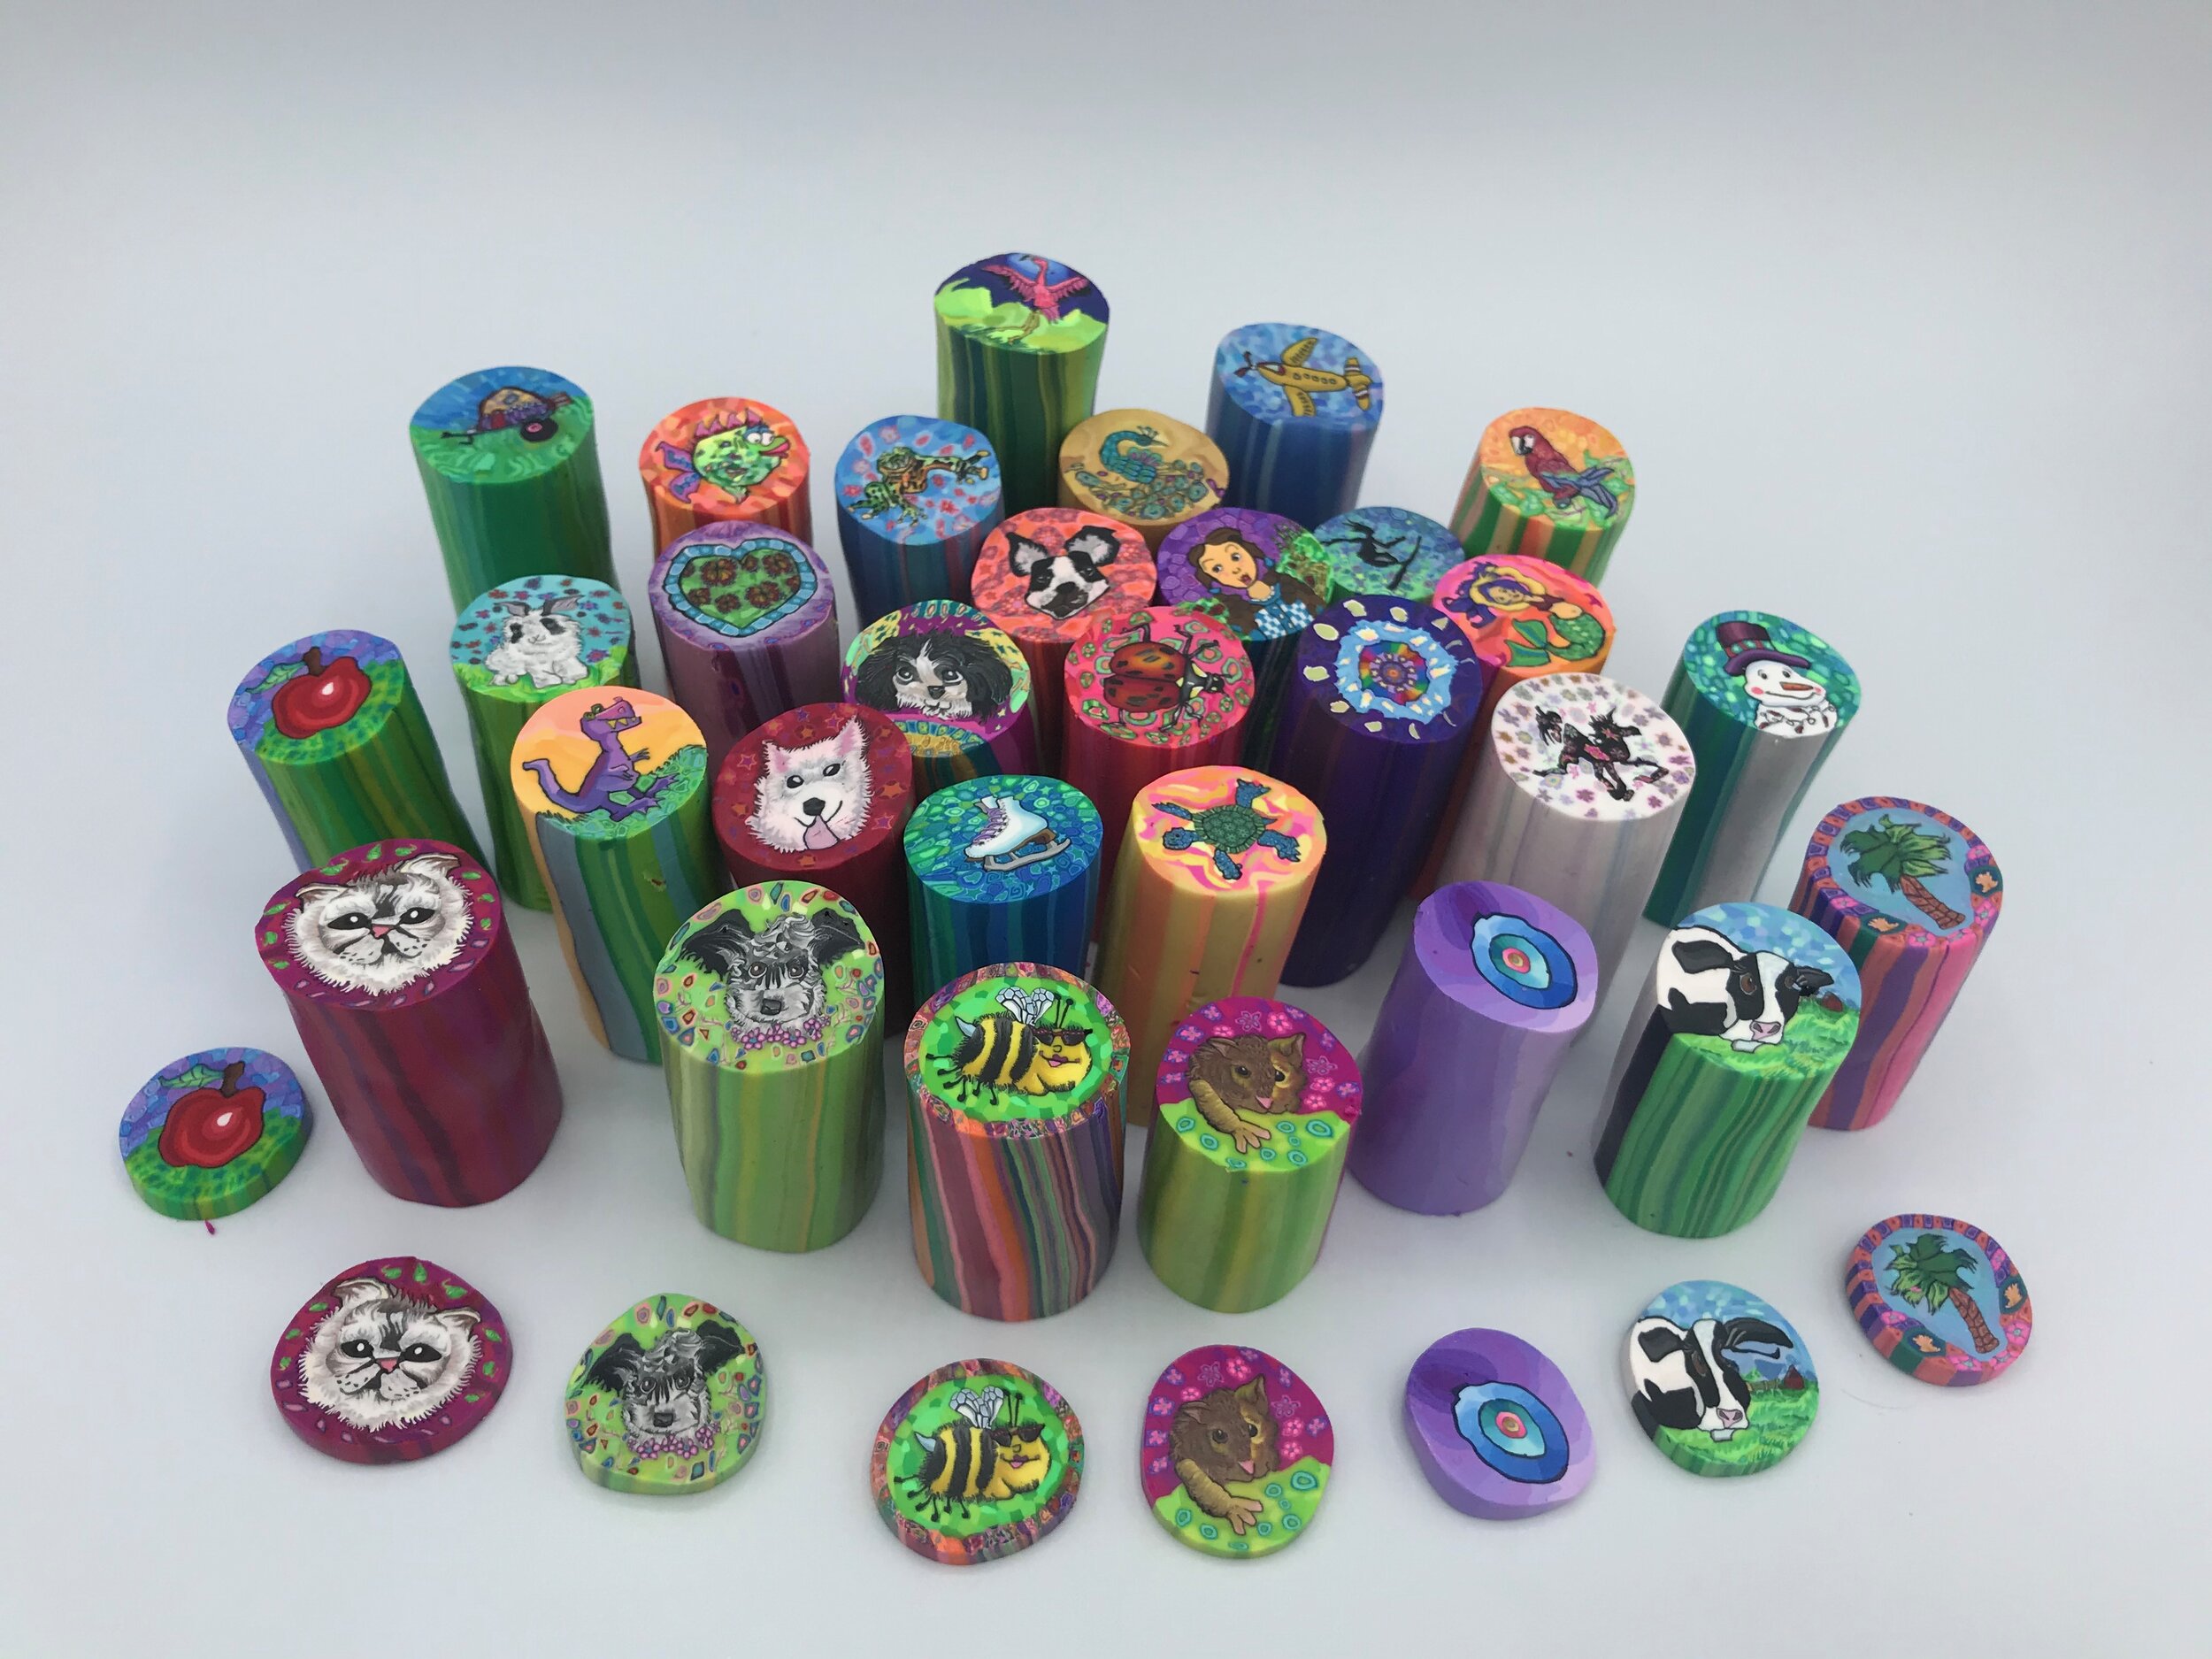 Amazing Silly Millies. Artist Layl McDill's Polymer Clay Cane Millefiores